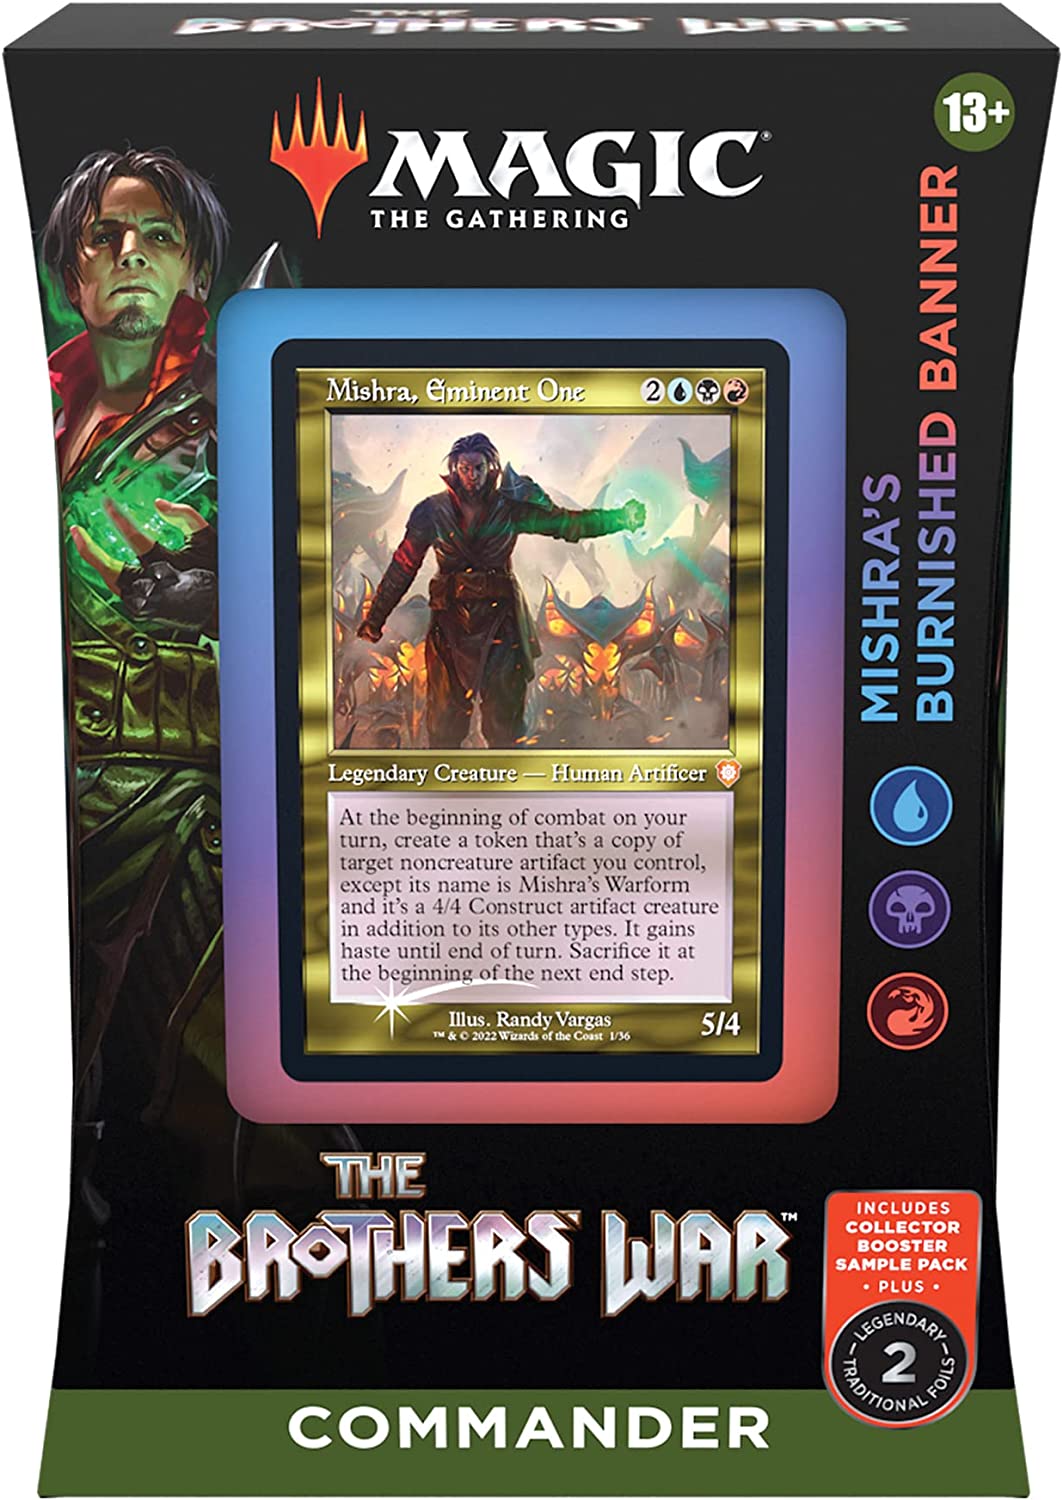 Magic: The Gathering Commander Deck Case - The Brothers' War (2 of Each Deck)